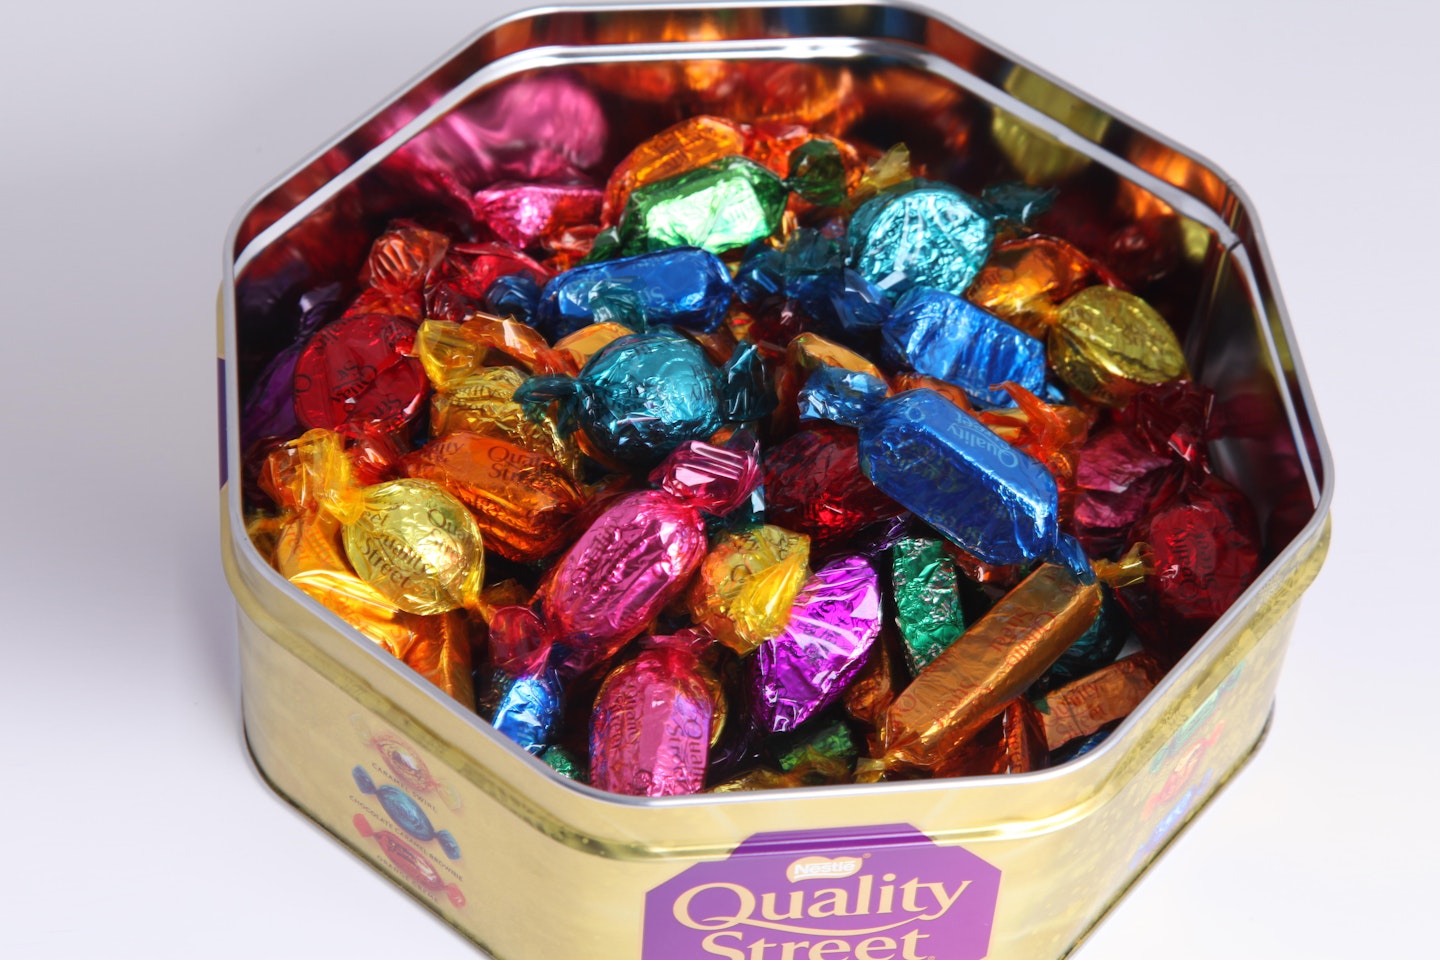 85 years of Quality Street